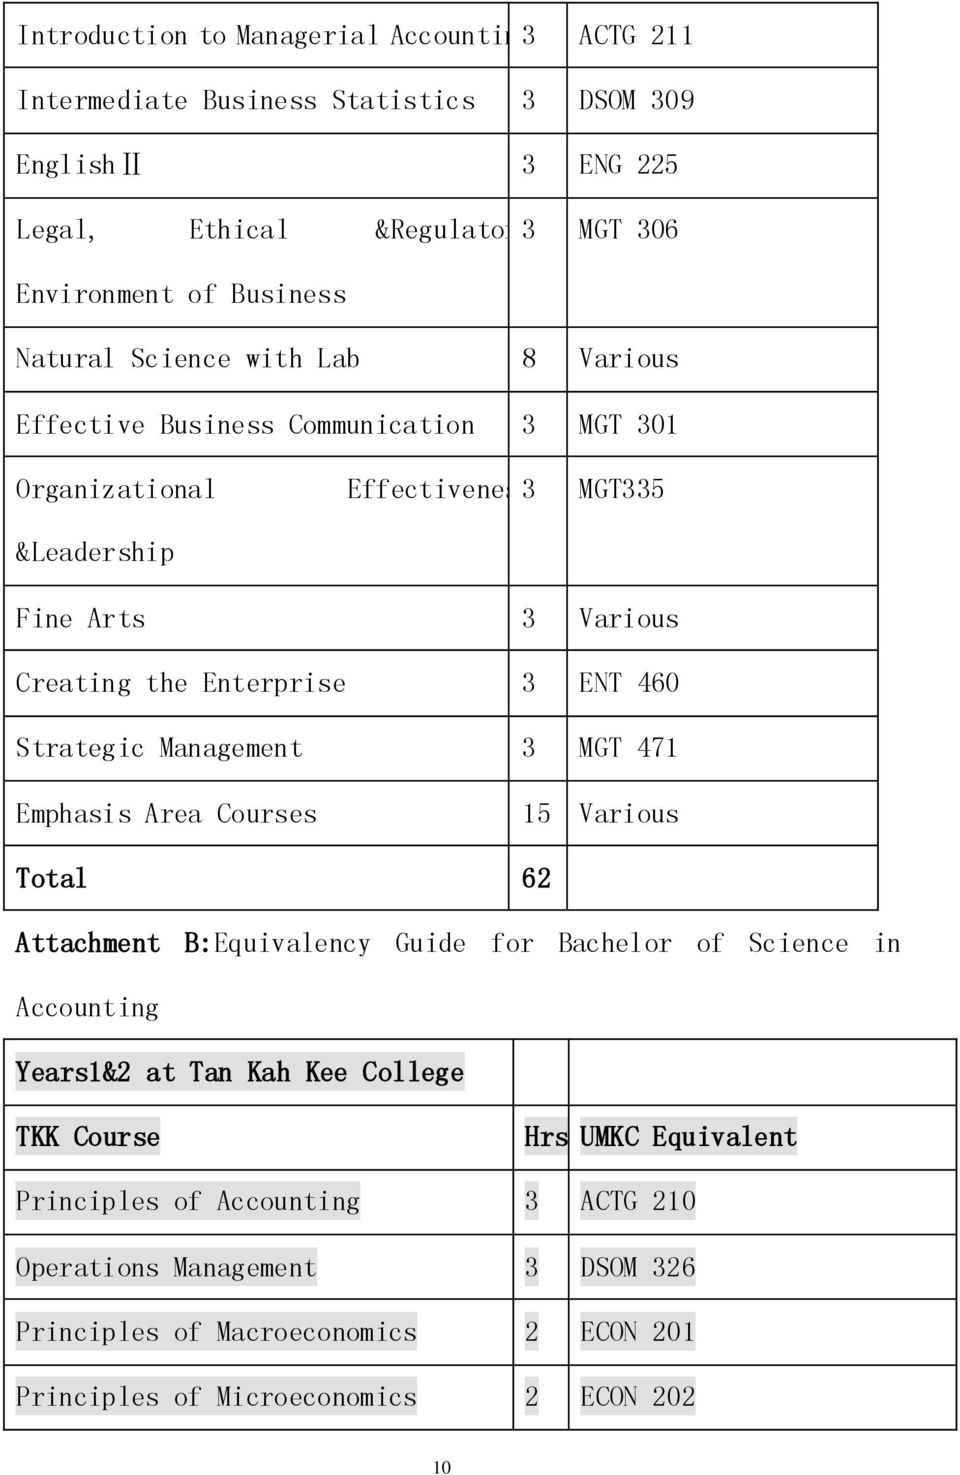 460 Strategic Management 3 MGT 471 Emphasis Area Courses 15 Various Total 62 Attachment B:Equivalency Guide for Bachelor of Science in Accounting Years1&2 at Tan Kah Kee College